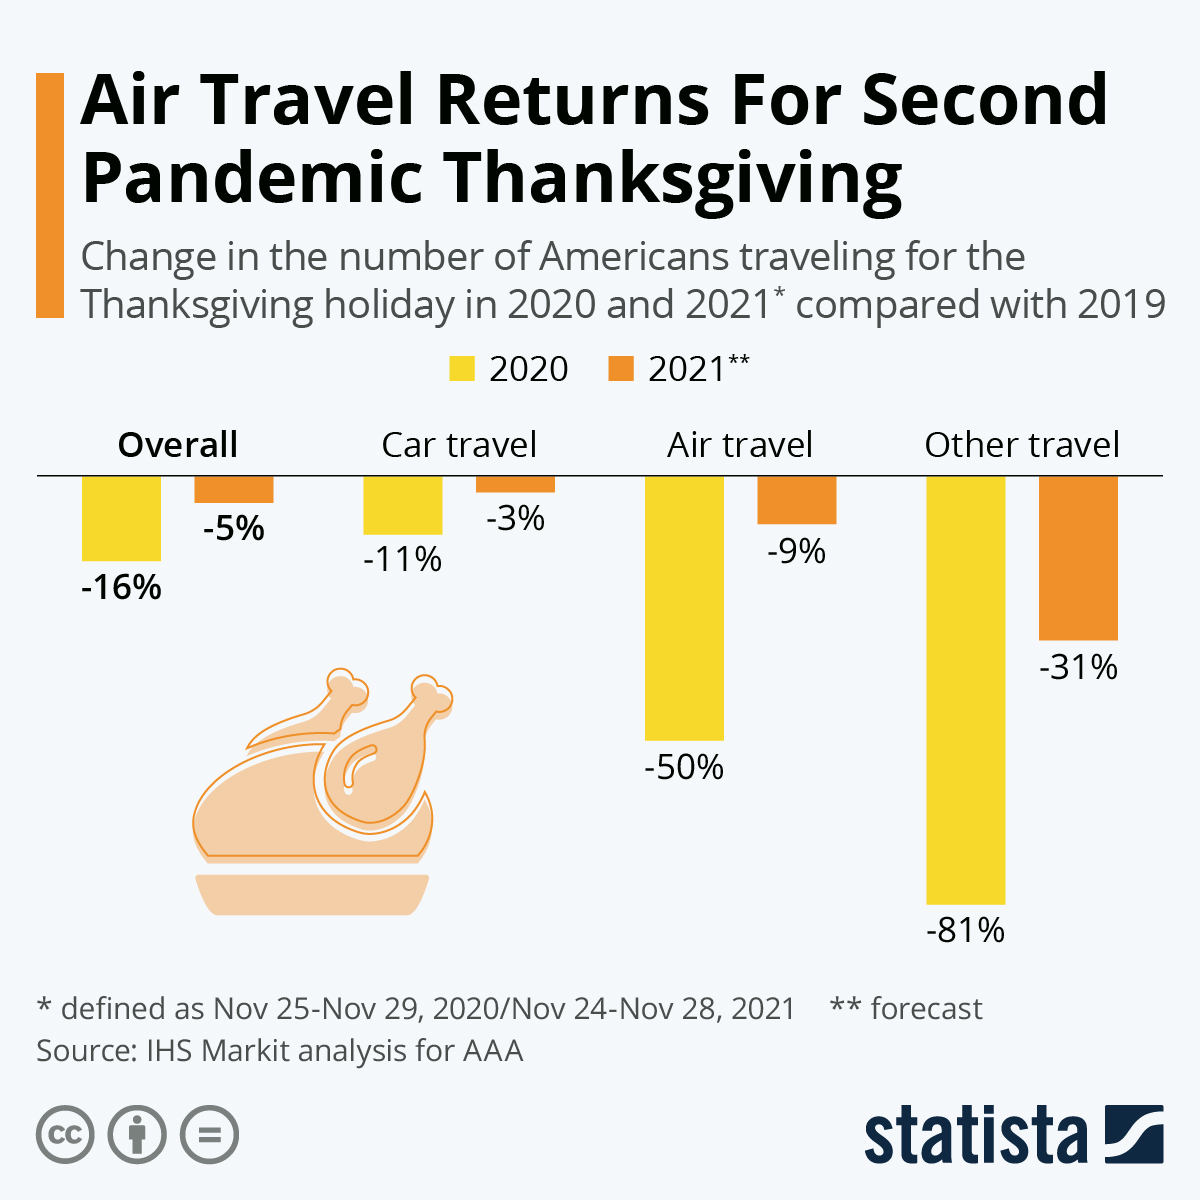 Air Travel Returns For Second Pandemic Thanksgiving